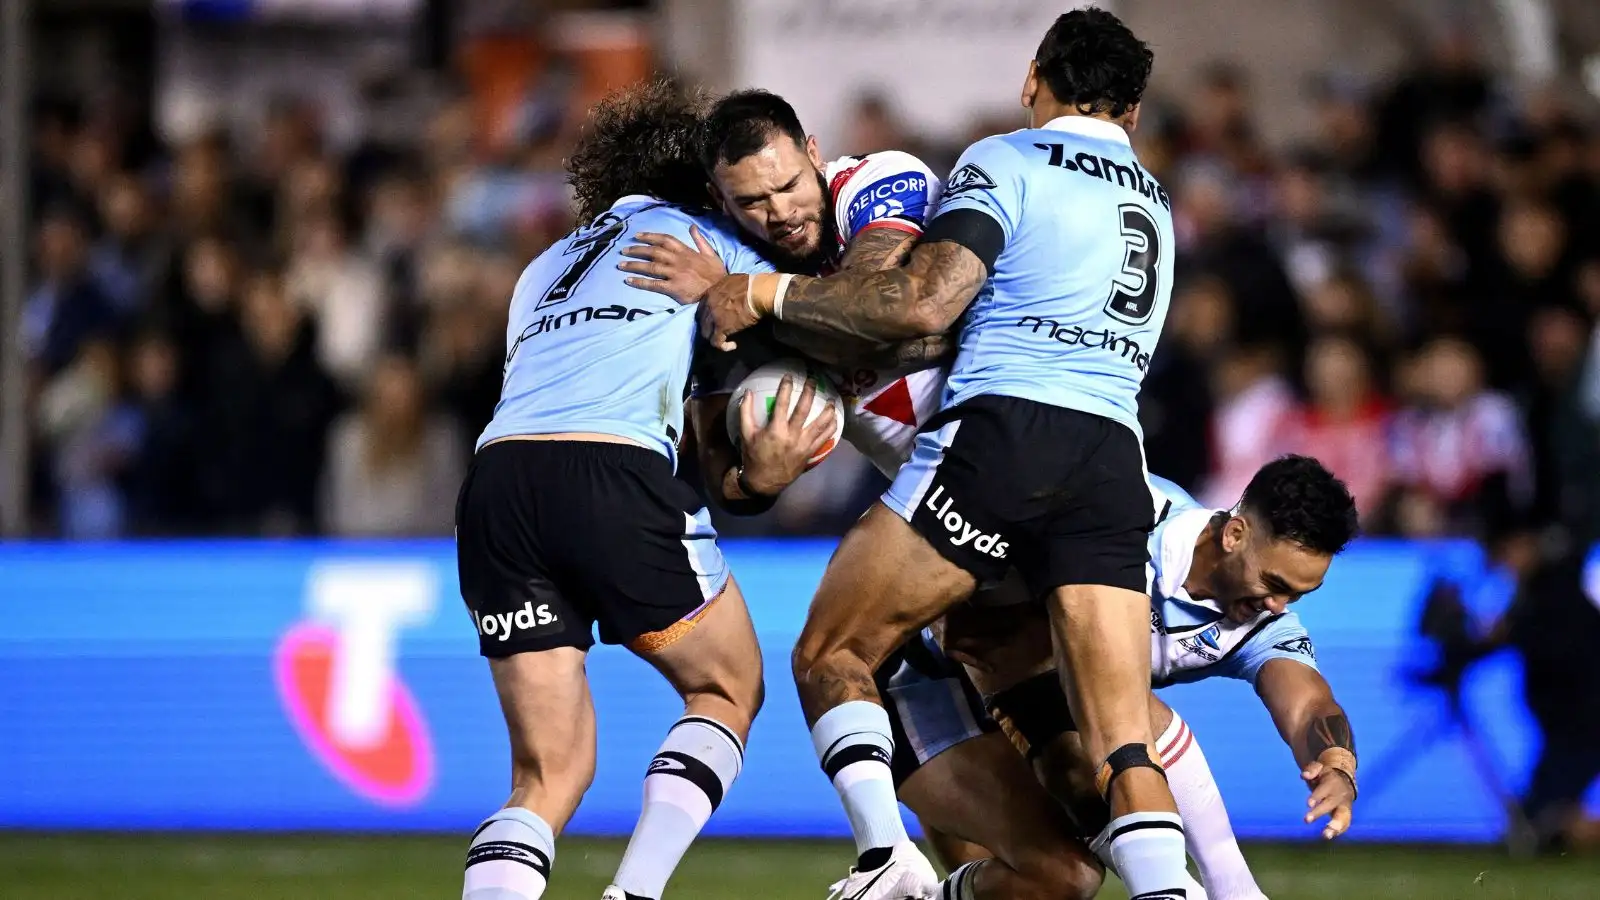 Ben Murdoch-Masila in action for St George Illawarra Dragons against Cronulla Sharks in the NRL. Photo by Australian Associated Press/Alamy Live News.